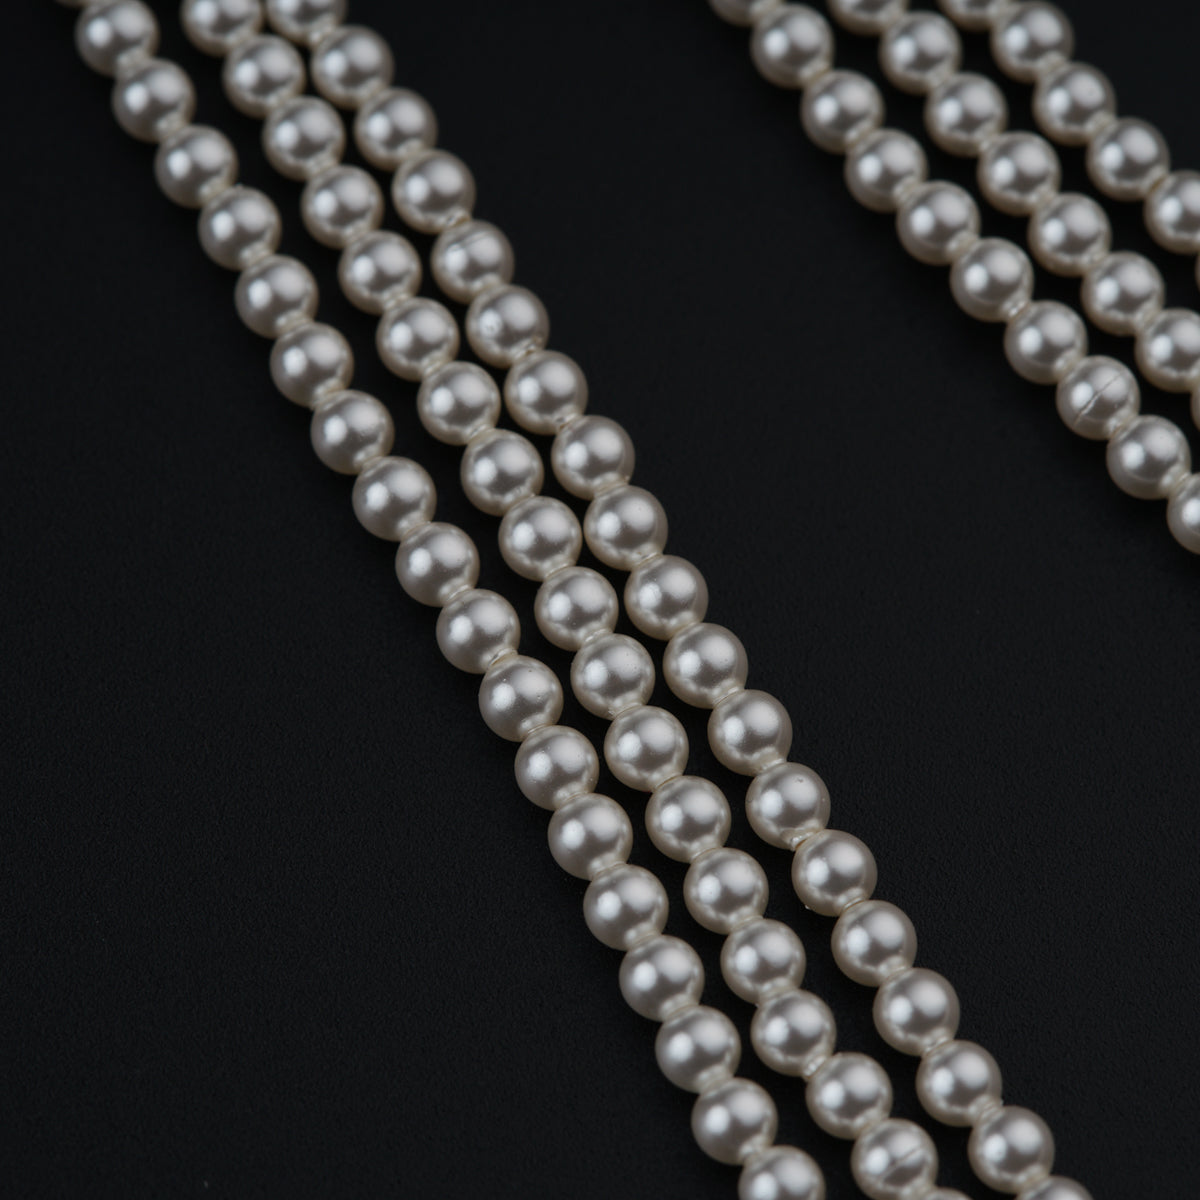 a close up of a strand of pearls